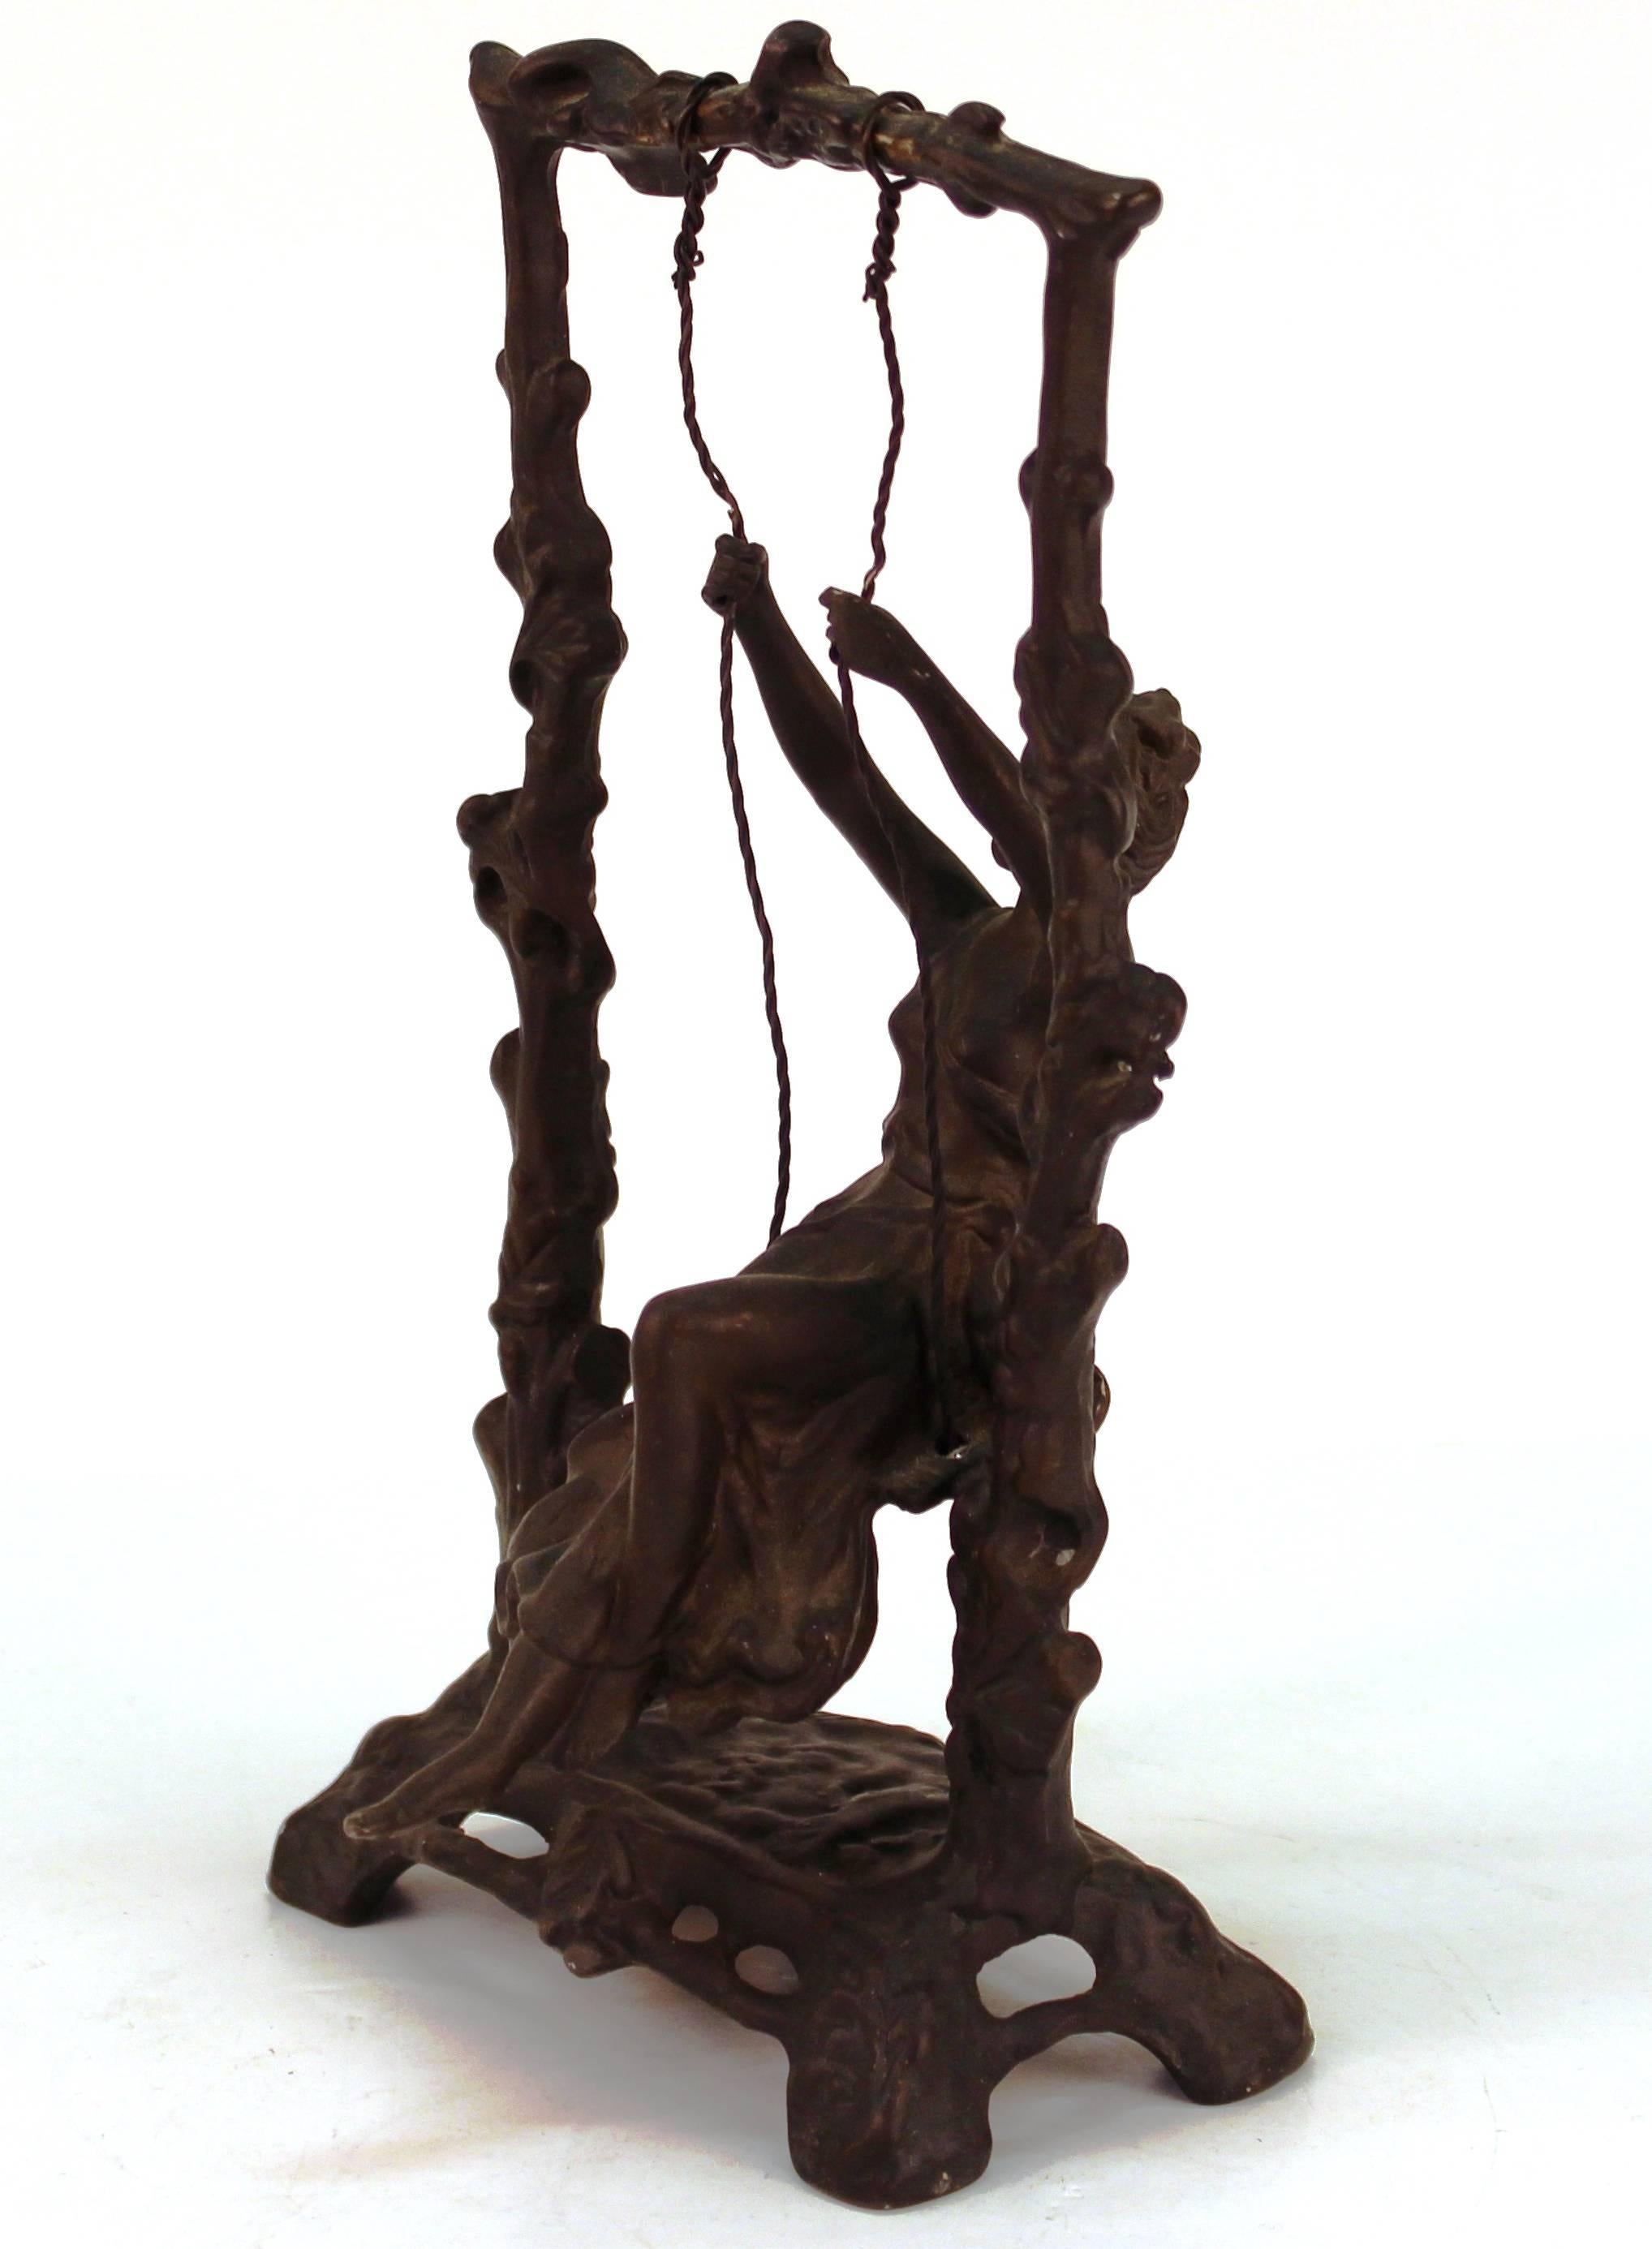 An Art Nouveau bronze sculpture of a girl on a swing, after Auguste Moreau. The piece is marked 'TD' on the bottom and is in good vintage condition.